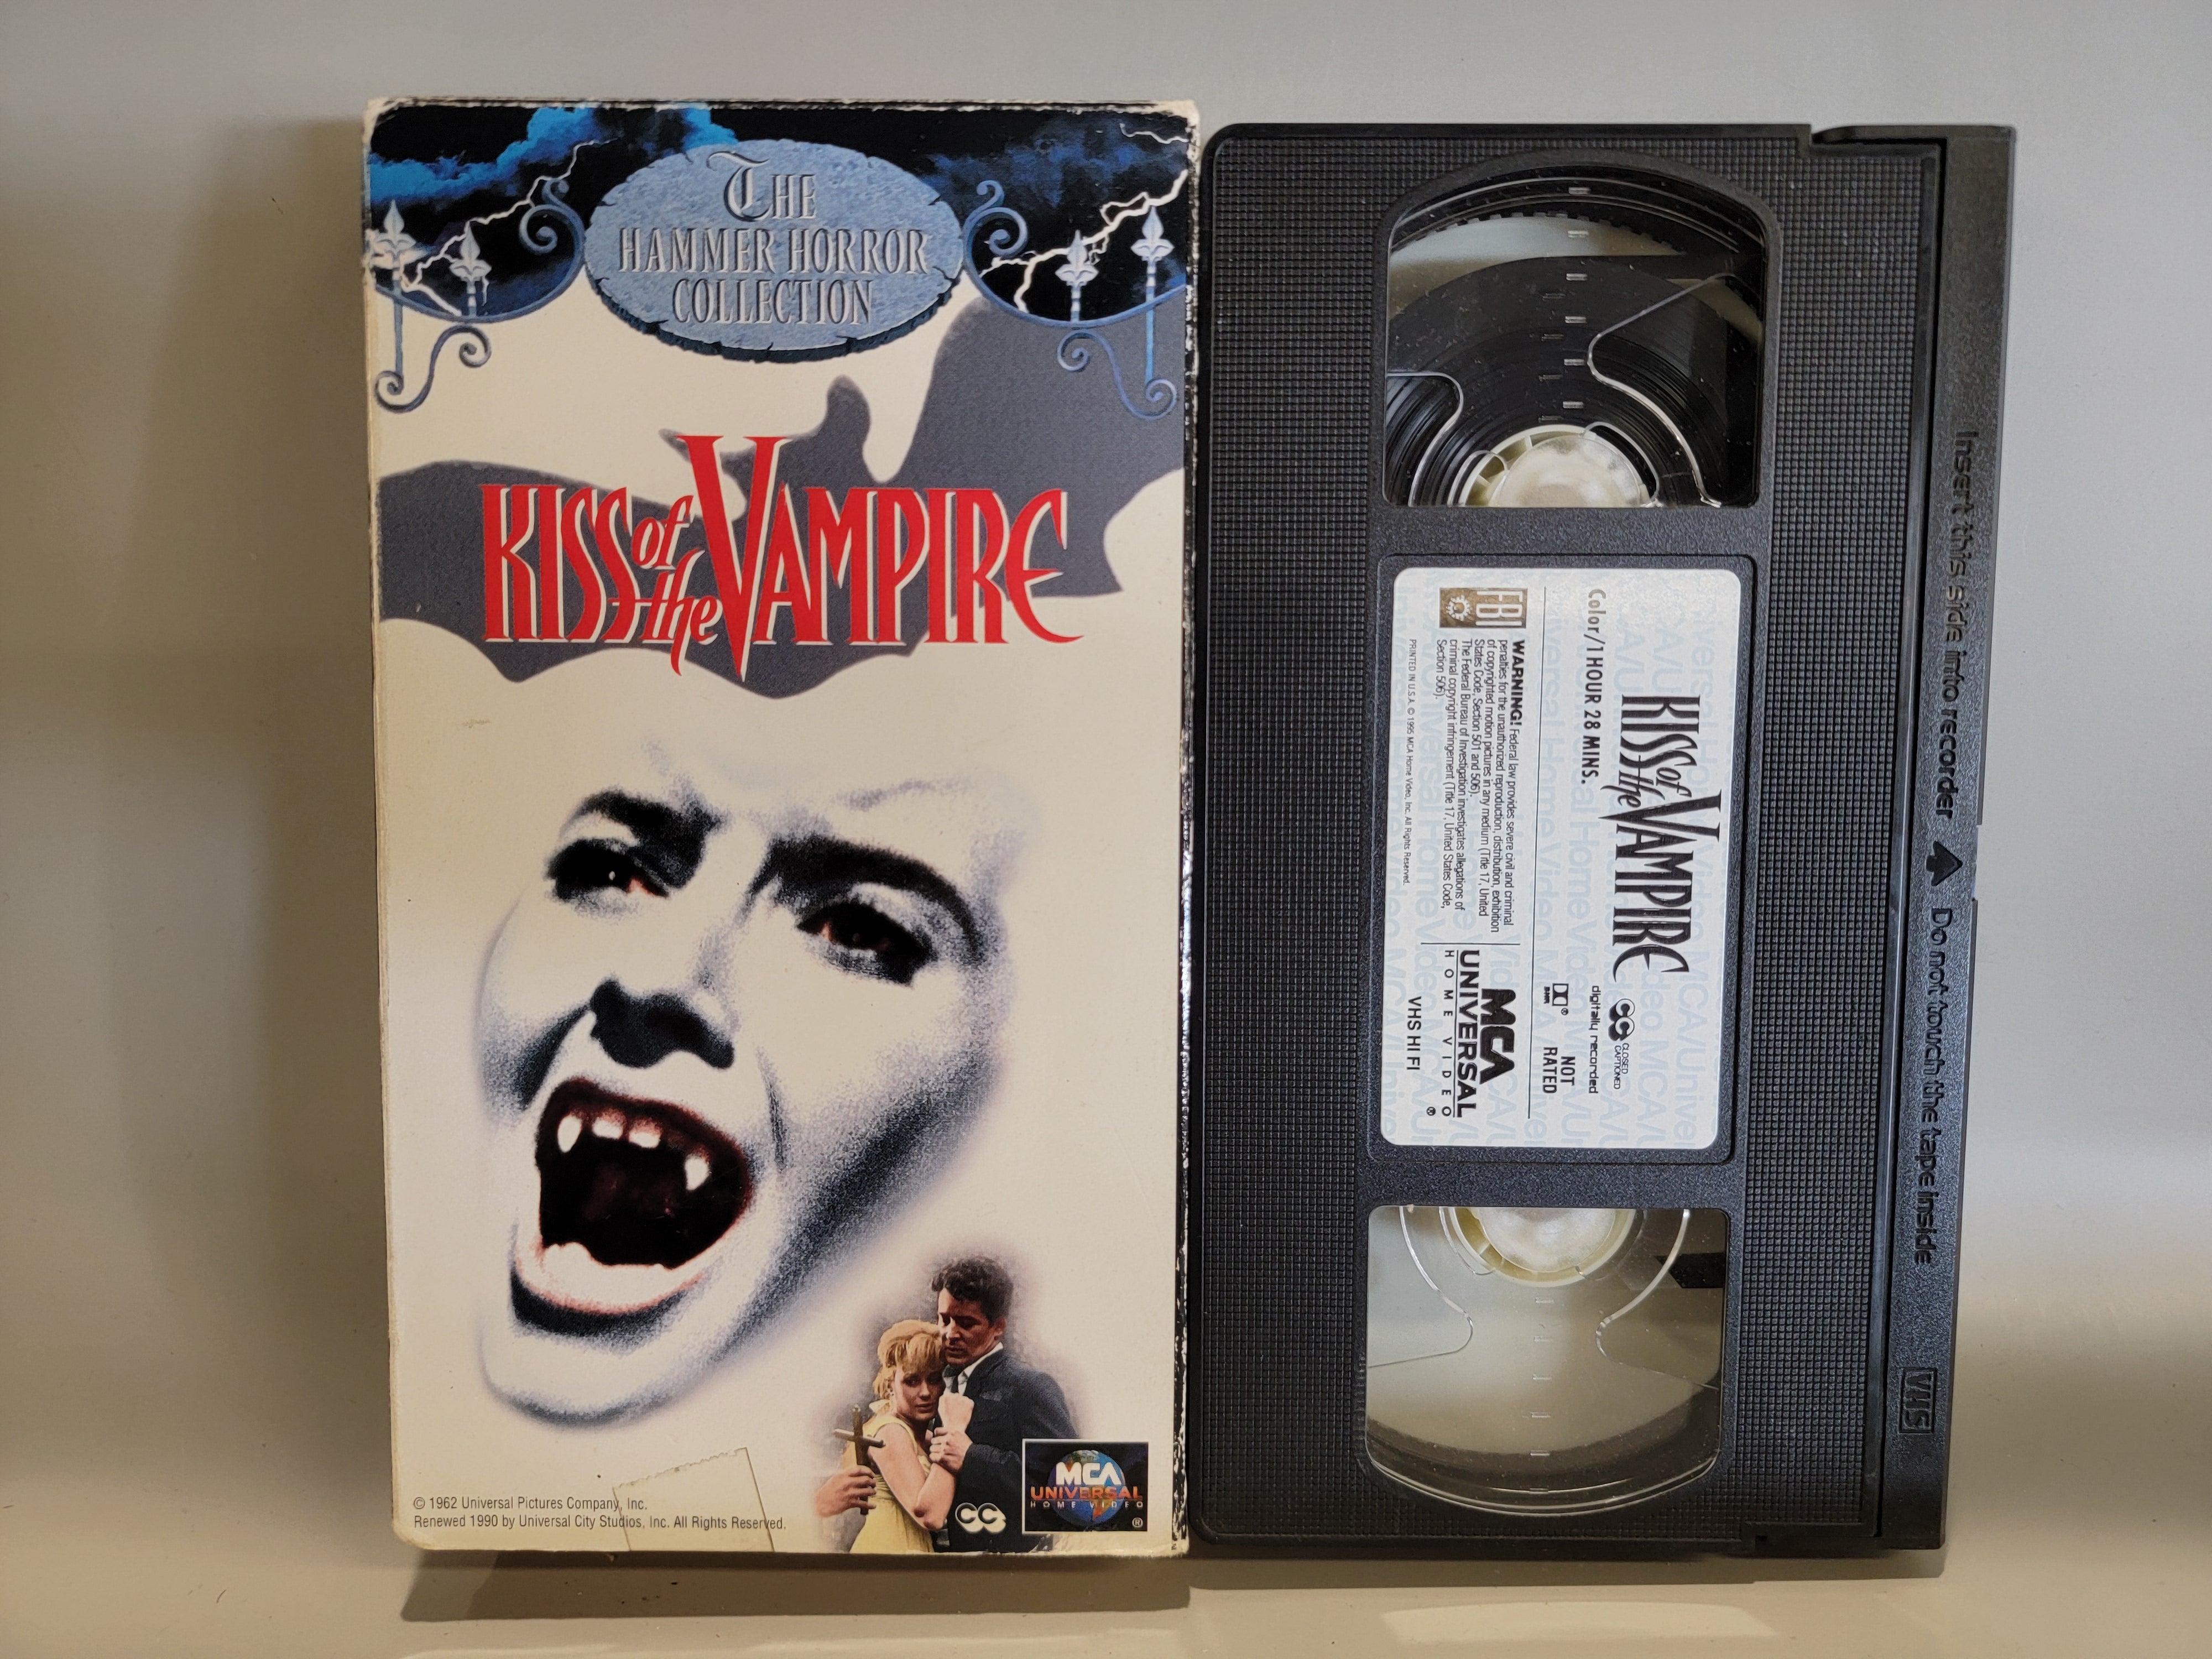 KISS OF THE VAMPIRE VHS [USED]